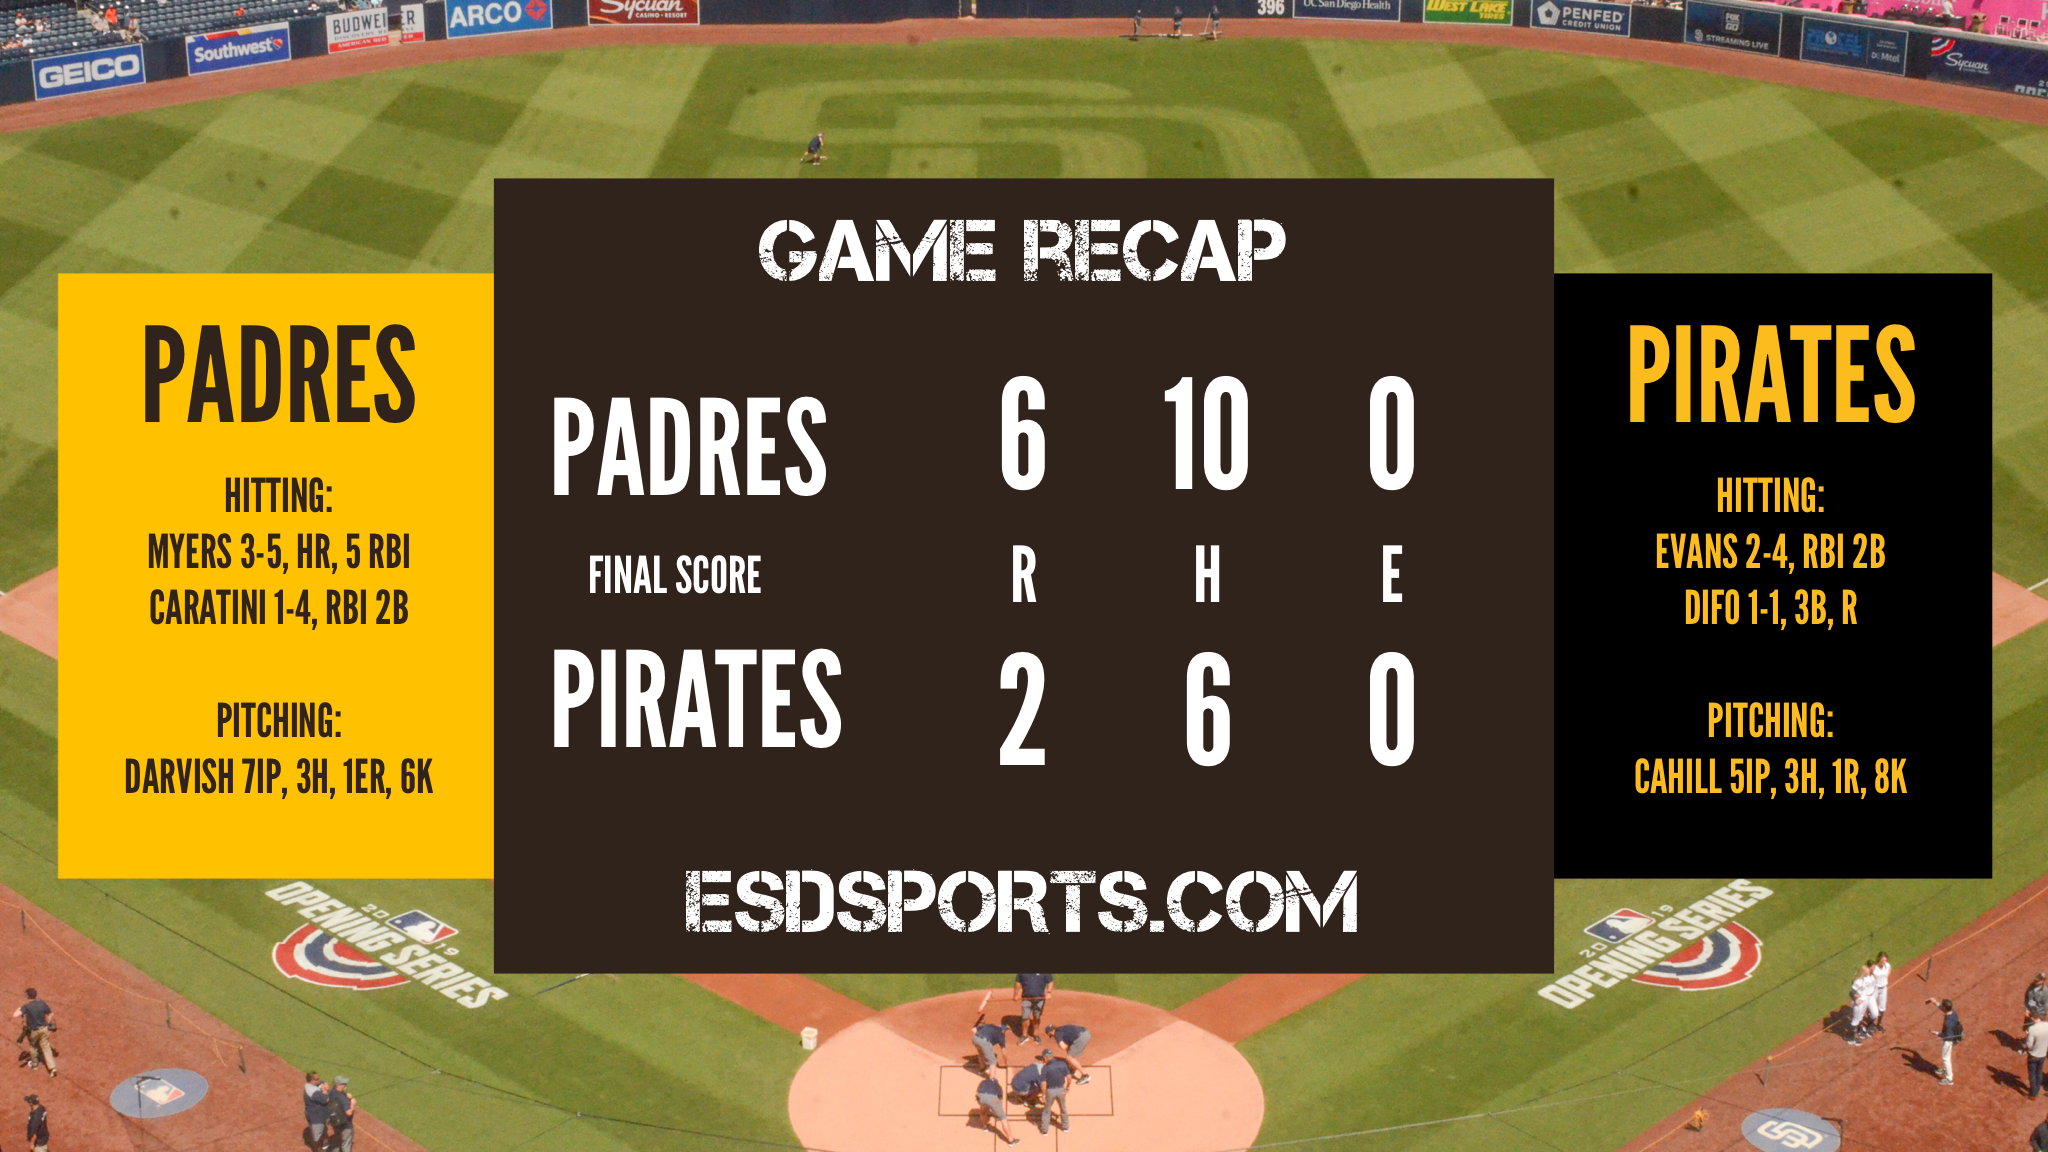 Padres defeat the Pirates, 6-2.